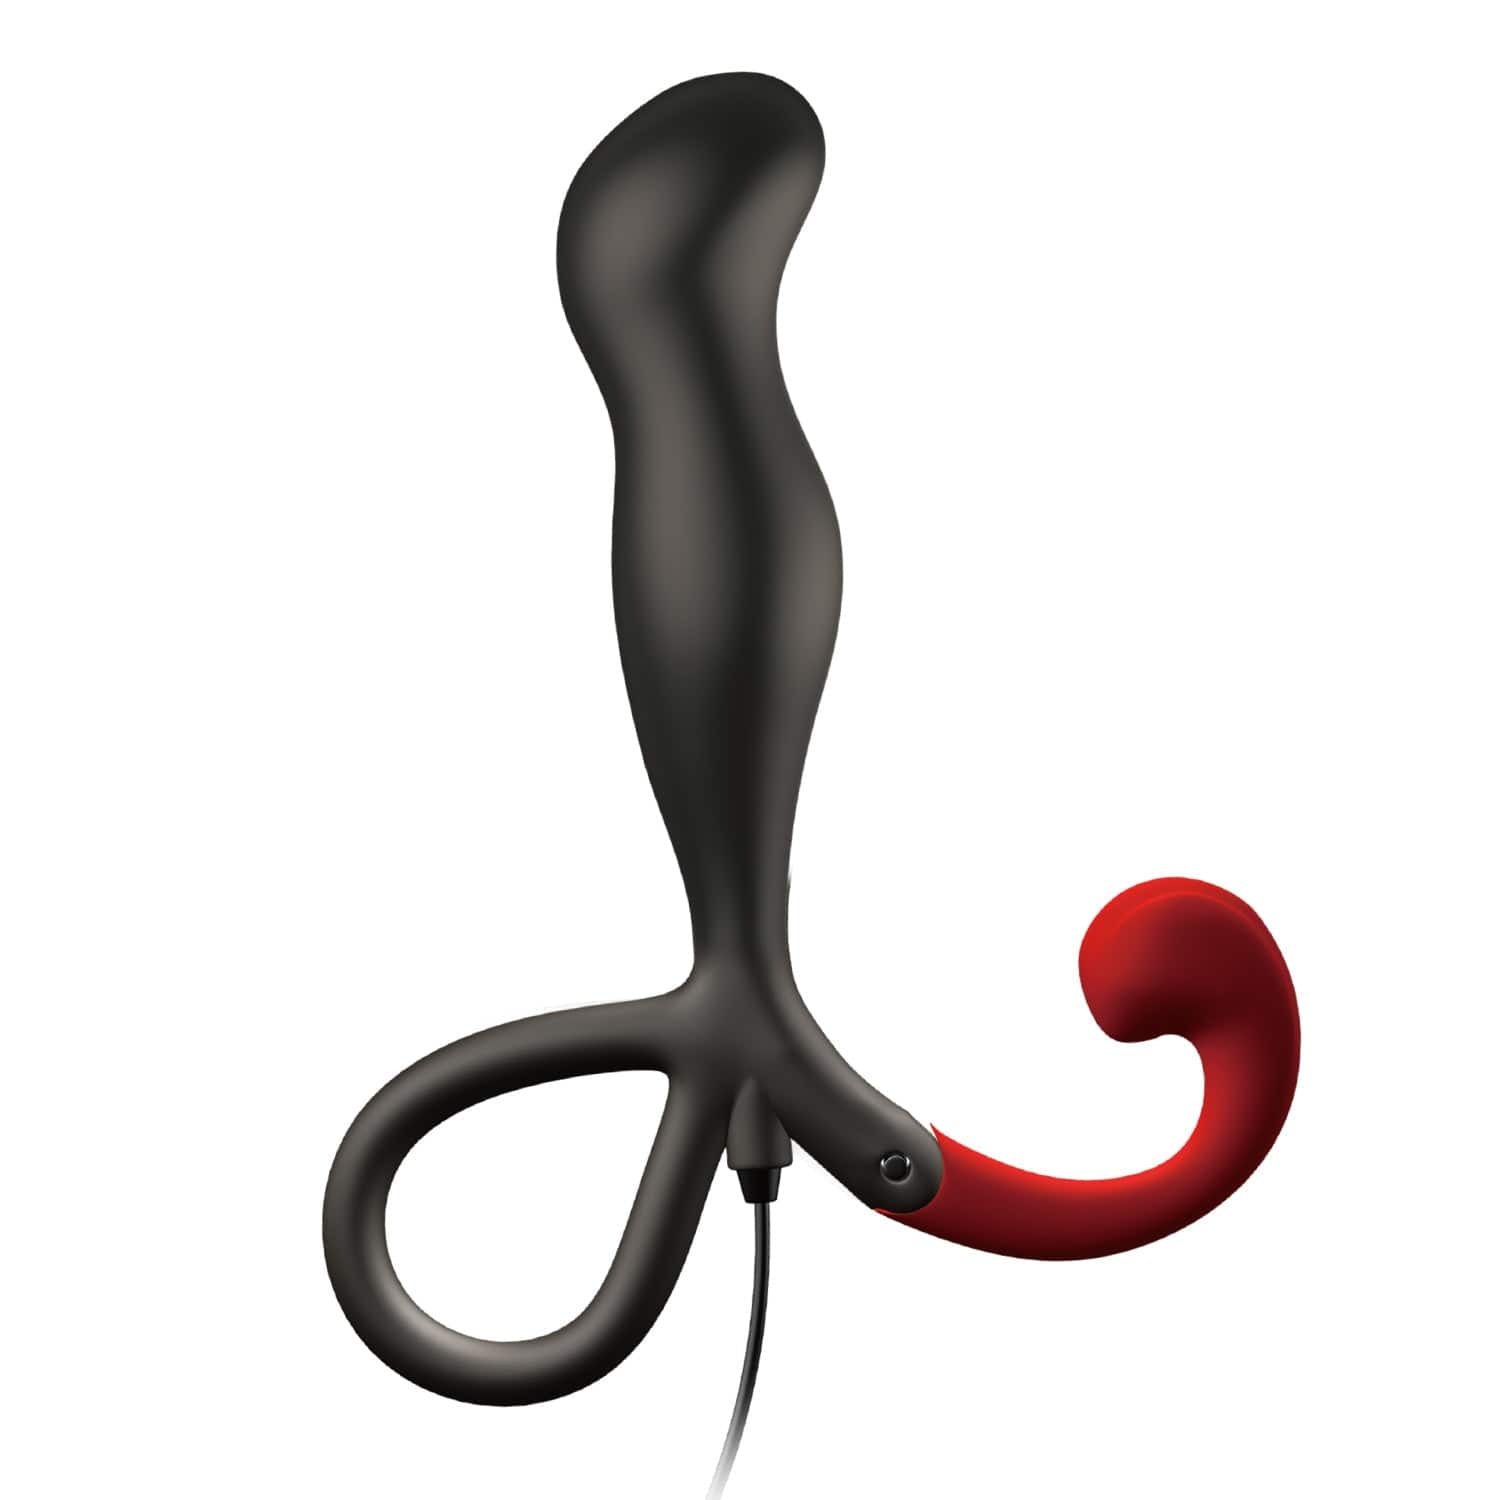 Wild One - Enemable R Type 3 Remote Control Prostate Massager (Black) Prostate Massager (Vibration) Non Rechargeable 626134922 CherryAffairs